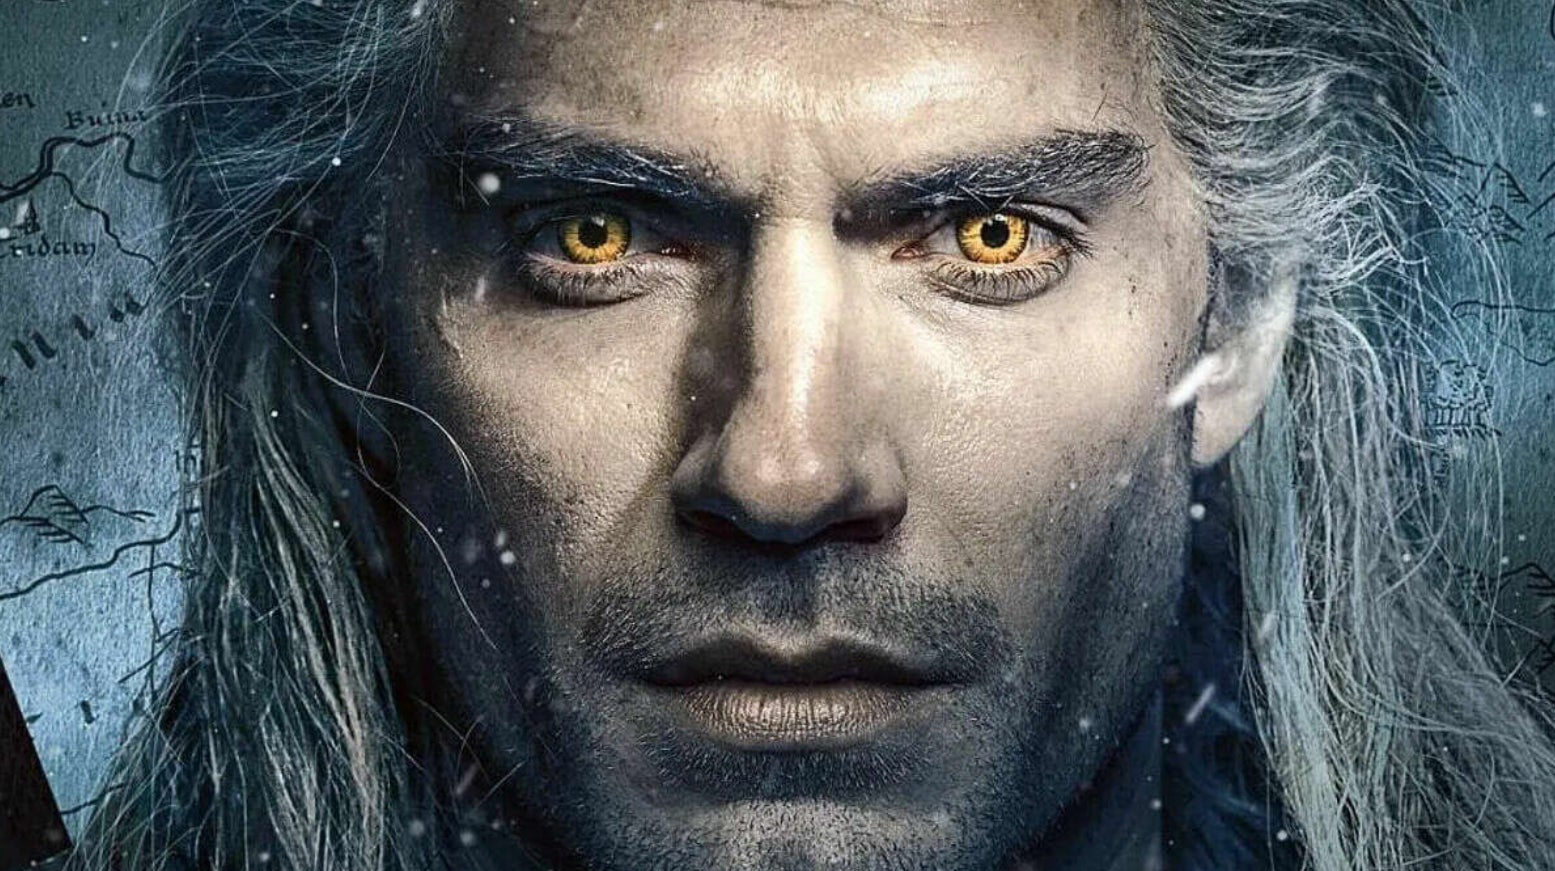 Image for Season 3 of Netflix's The Witcher script is already written